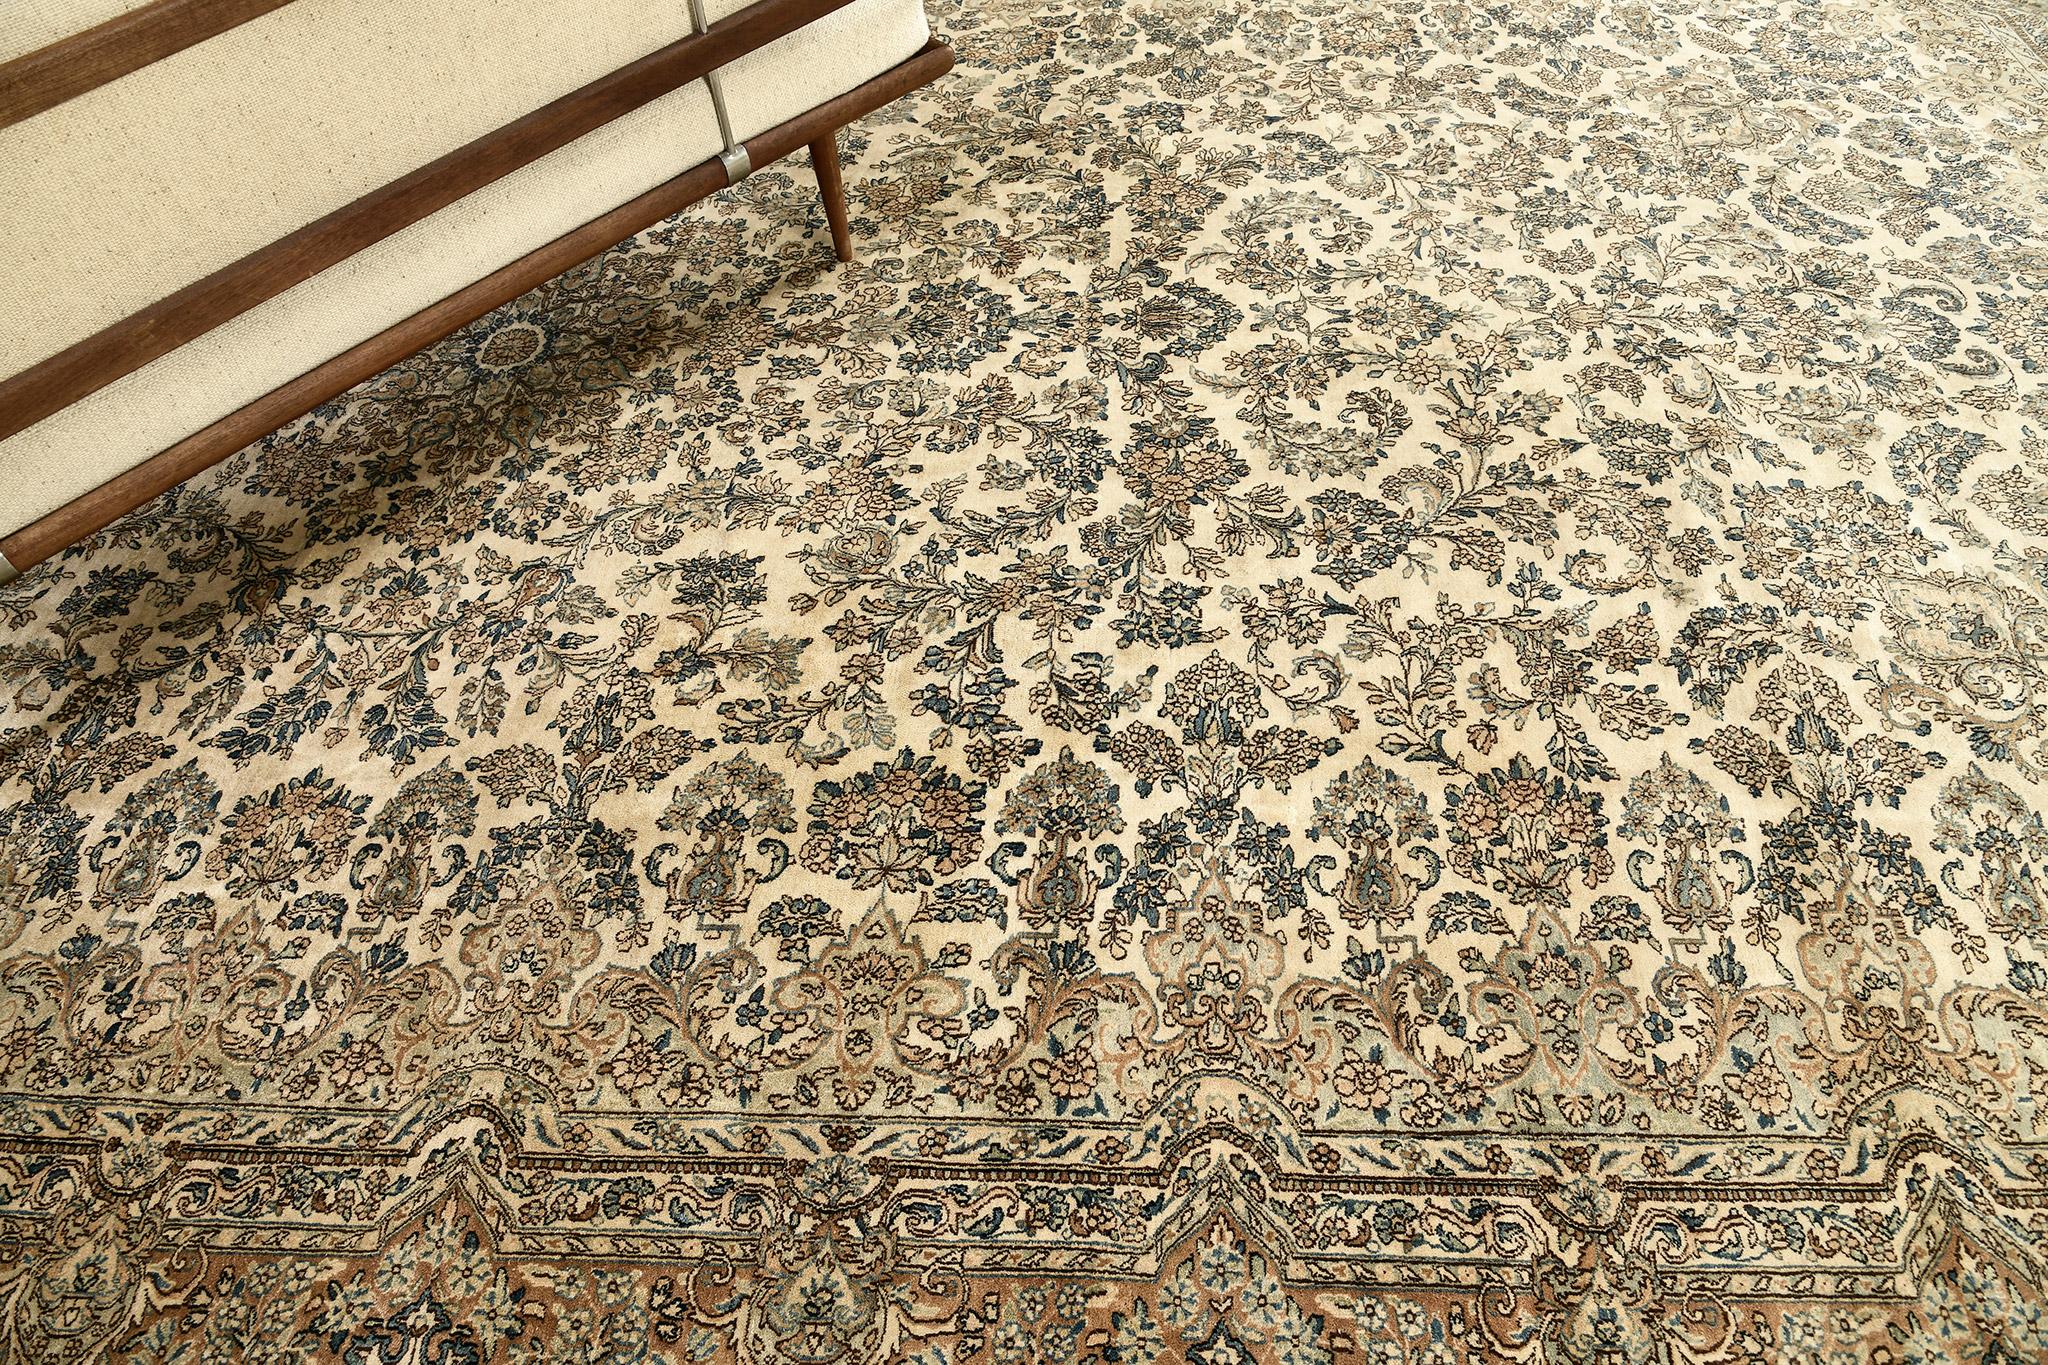 This exquisite and refined revival of Kerman rug reflects the intricacy and colors that can be seen in the field of allover leafy tendrils and glamorous florettes. This results in a wonderful balanced look and feel. A snake colored tone will make a